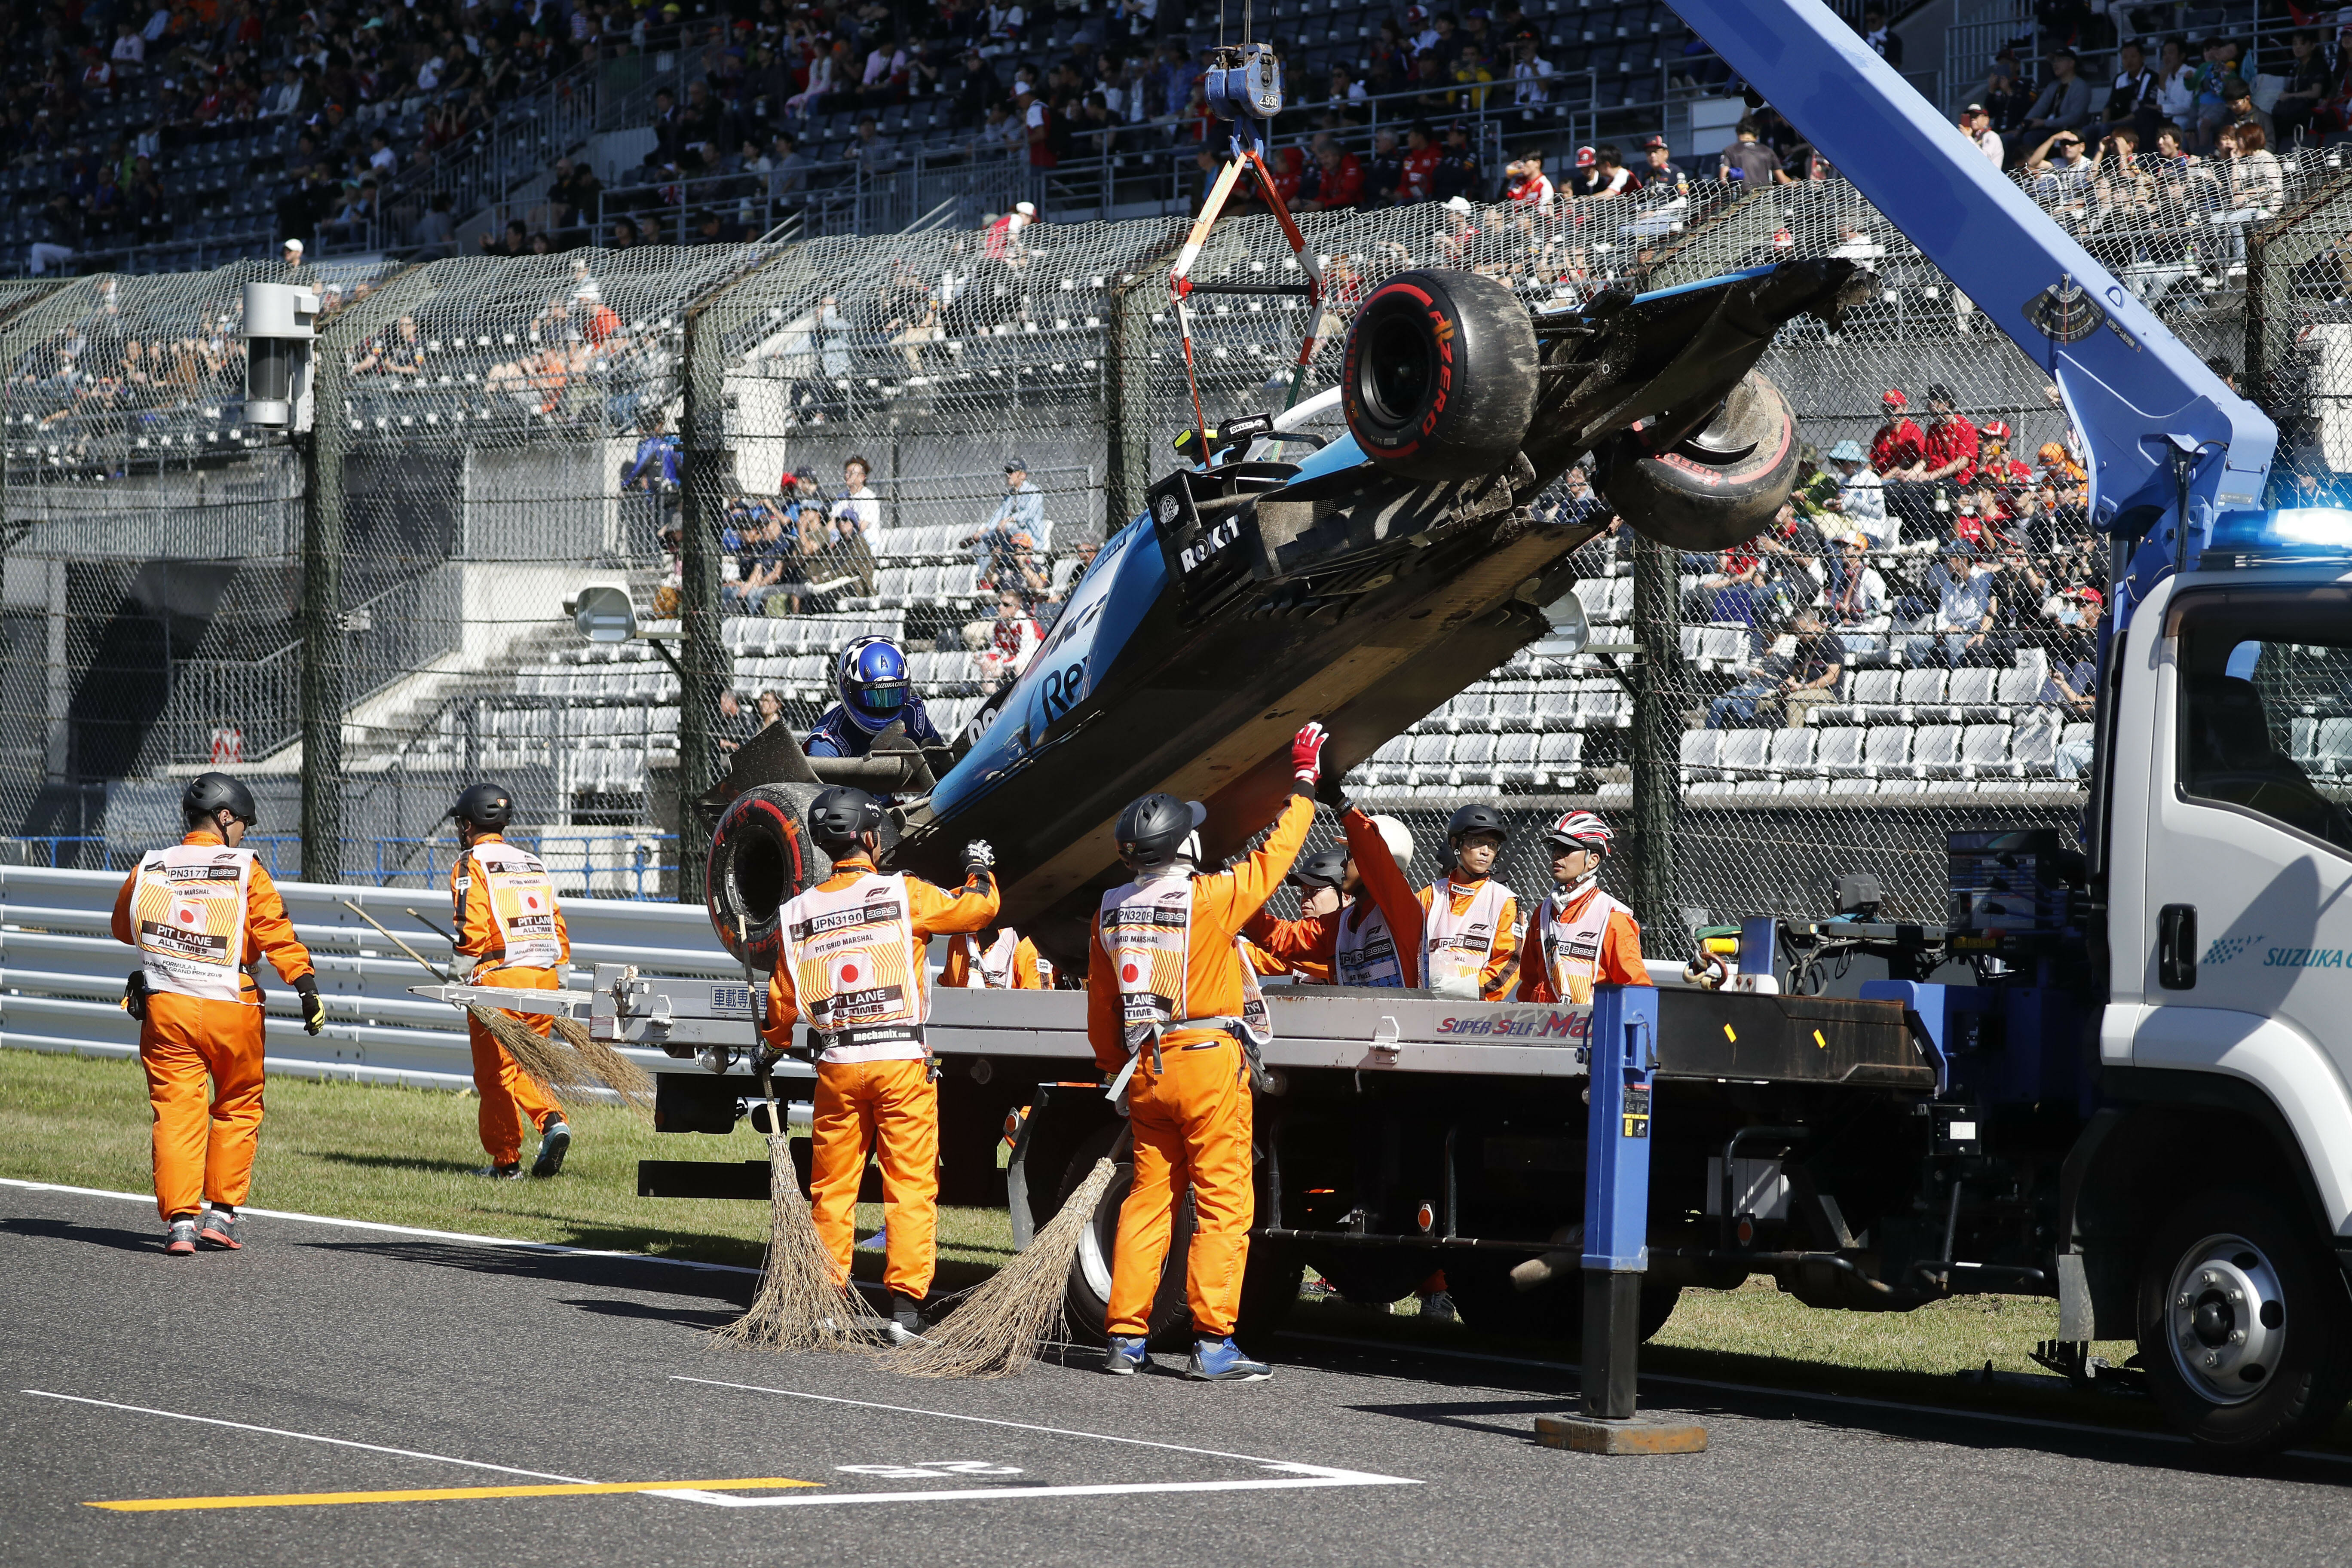 The car of Williams driver Robert Kubica of Poland is removed from the track after crashing during the qualifying session for the Japanese Formula One Grand Prix at Suzuka Circuit in Suzuka, central Japan, Sunday, Oct. 13, 2019.